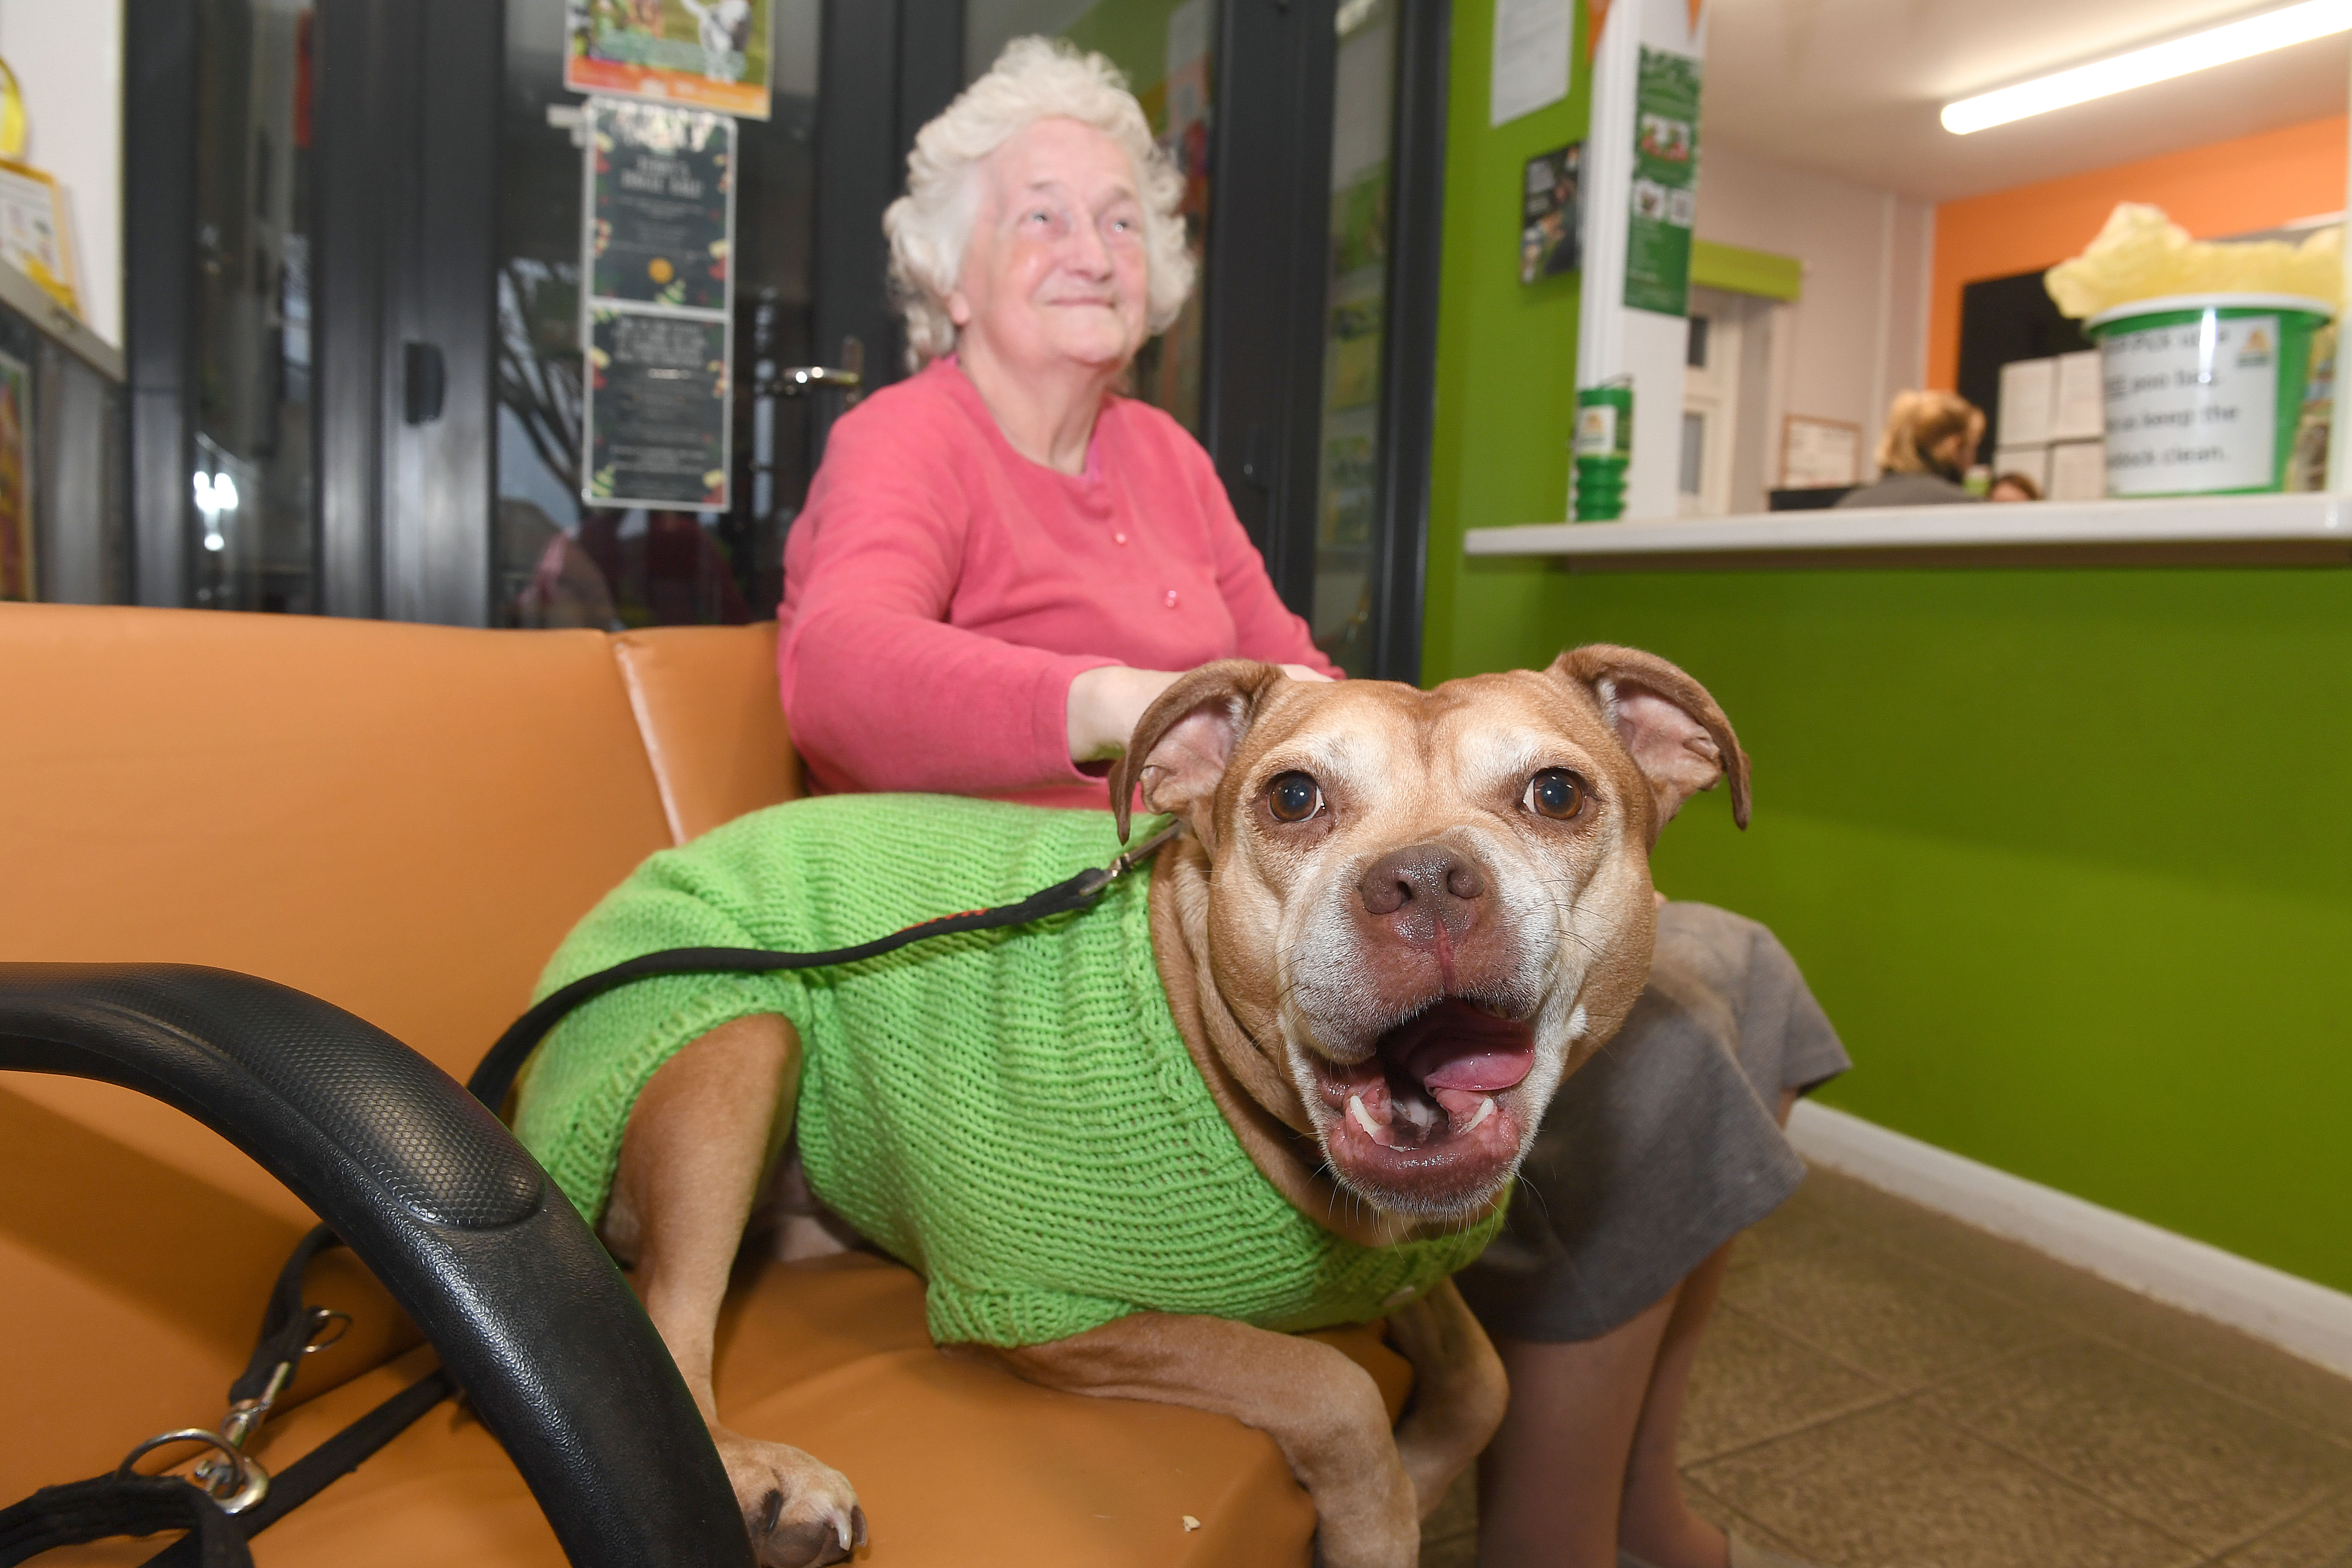 Residents Knit Coats for Dogs